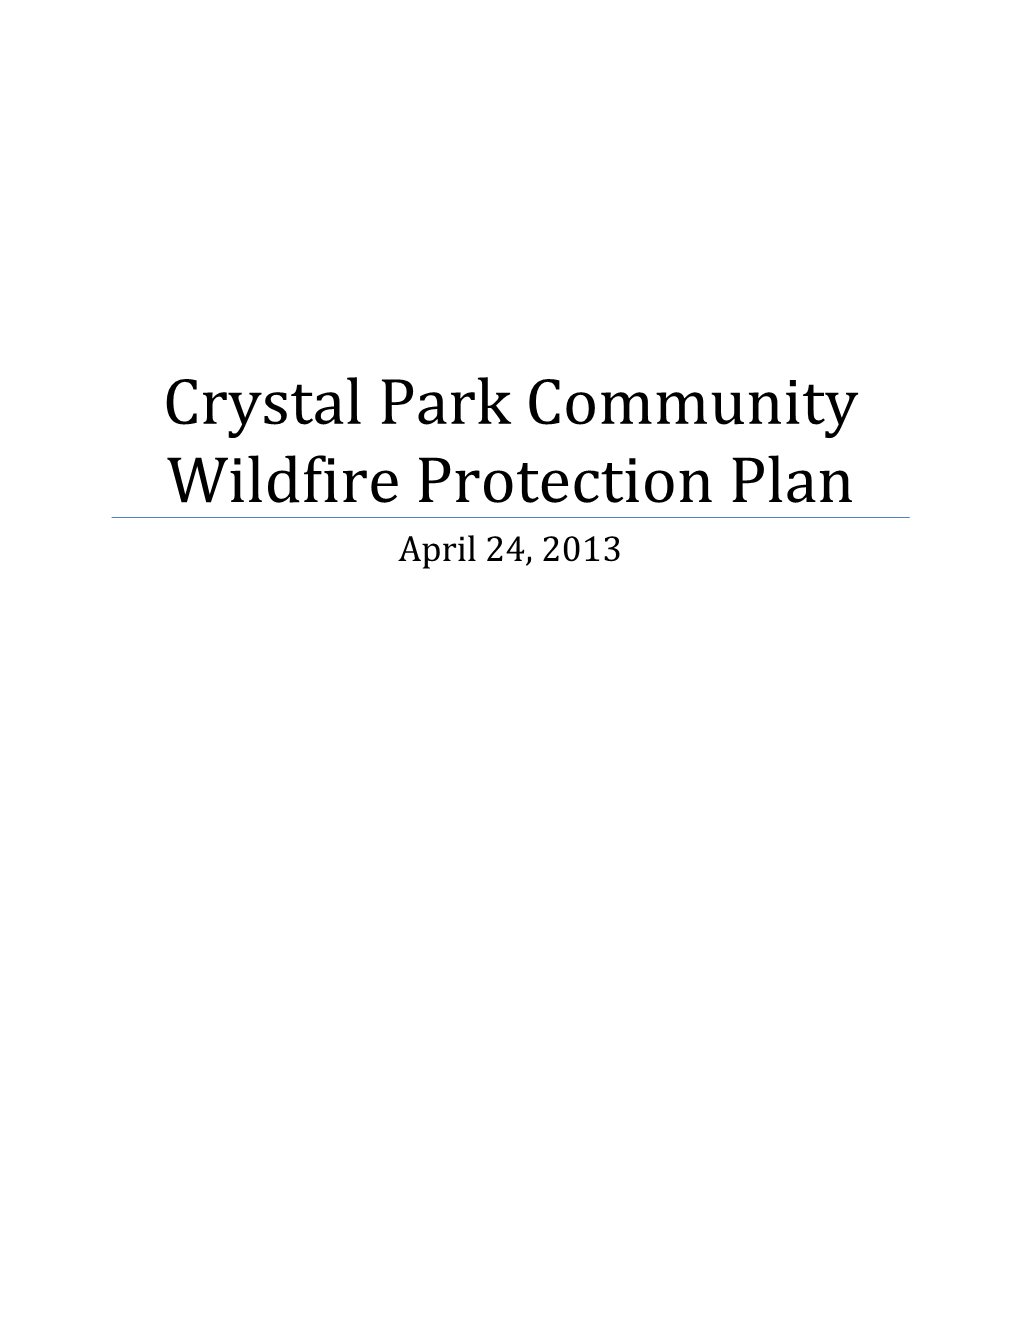 Crystal Park CWPP Published in 2006 and Presents a Comprehensive Program to Minimize the Risks to Life and Property Due to Wildfire